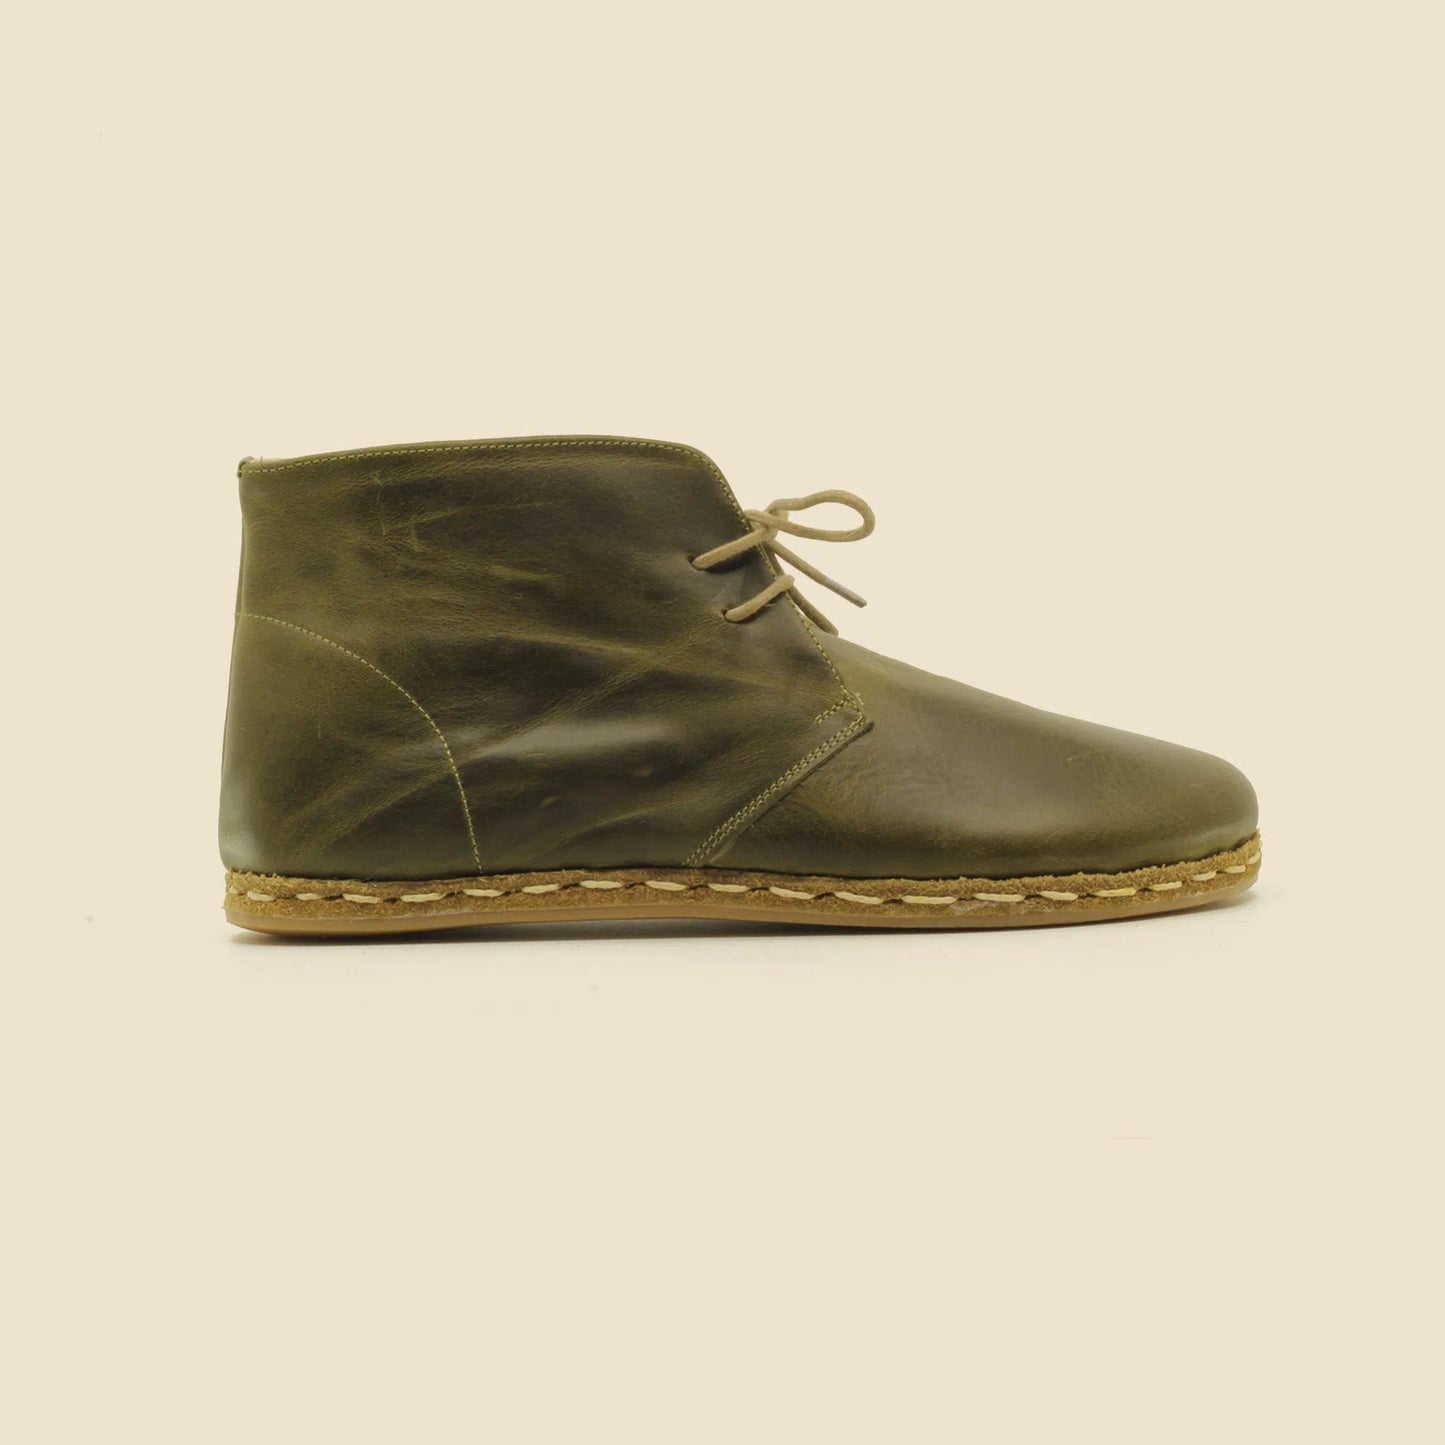 Olive Green Oxford Boots Women's-Women's Boots-nefesshoes-3-Nefes Shoes